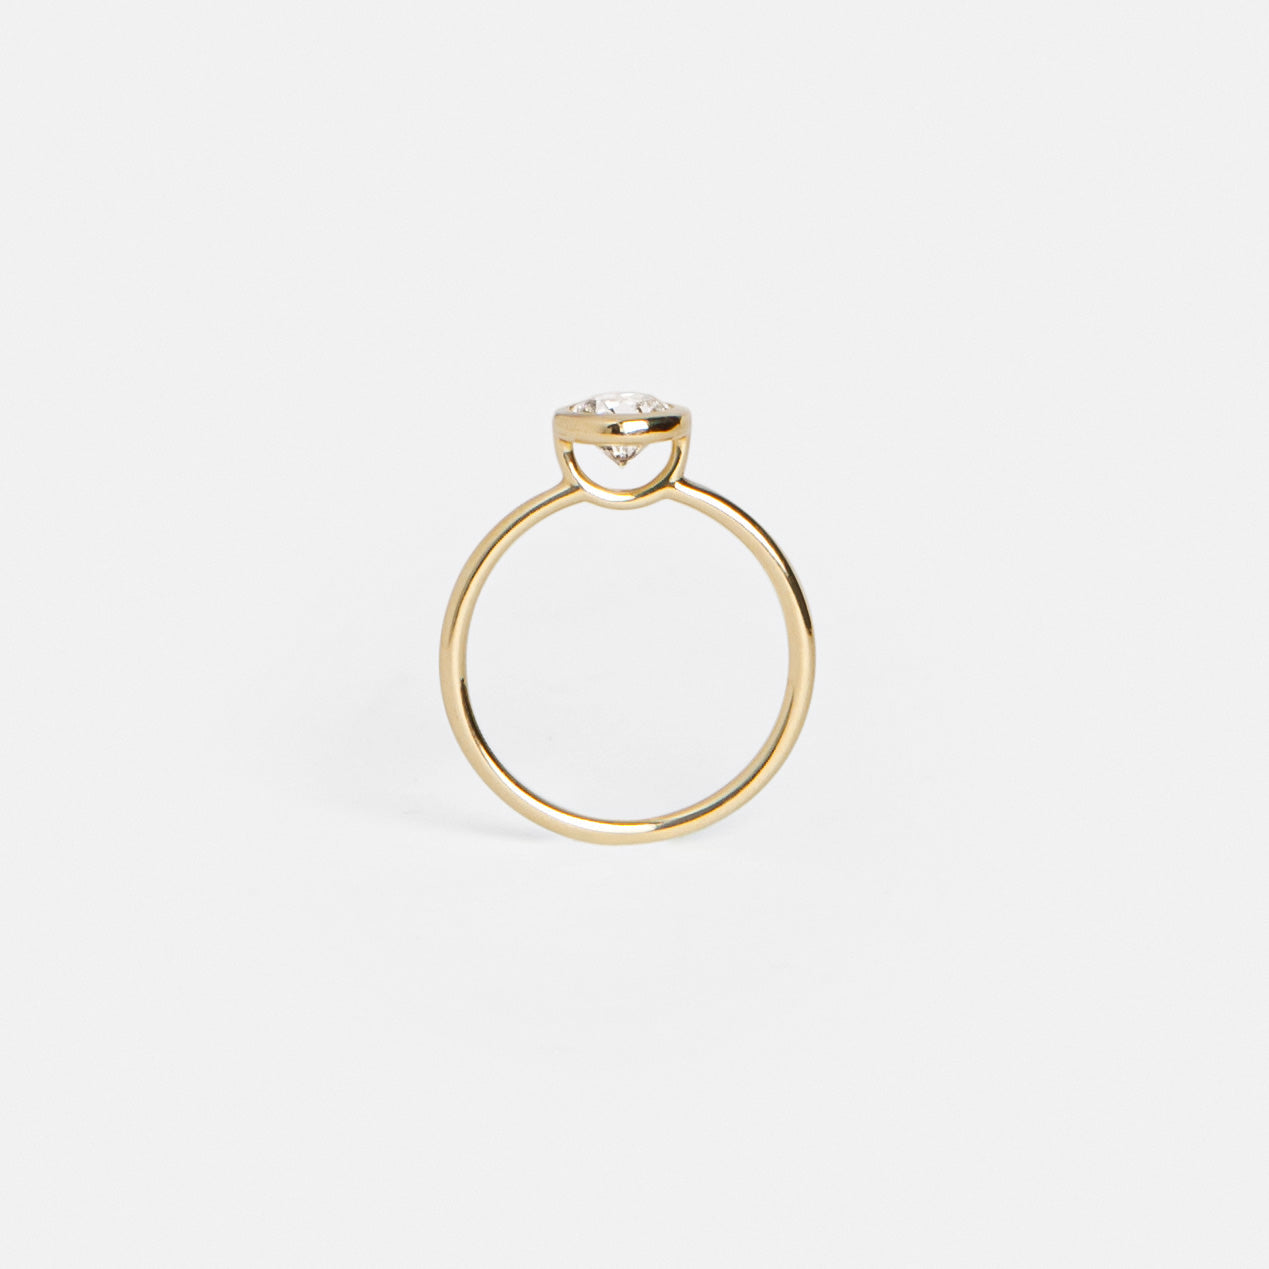 Arti Thin Ring in 14k Gold set with a 0.9ct round brilliant cut Lab-Grown diamond By SHW Fine Jewelry NYC